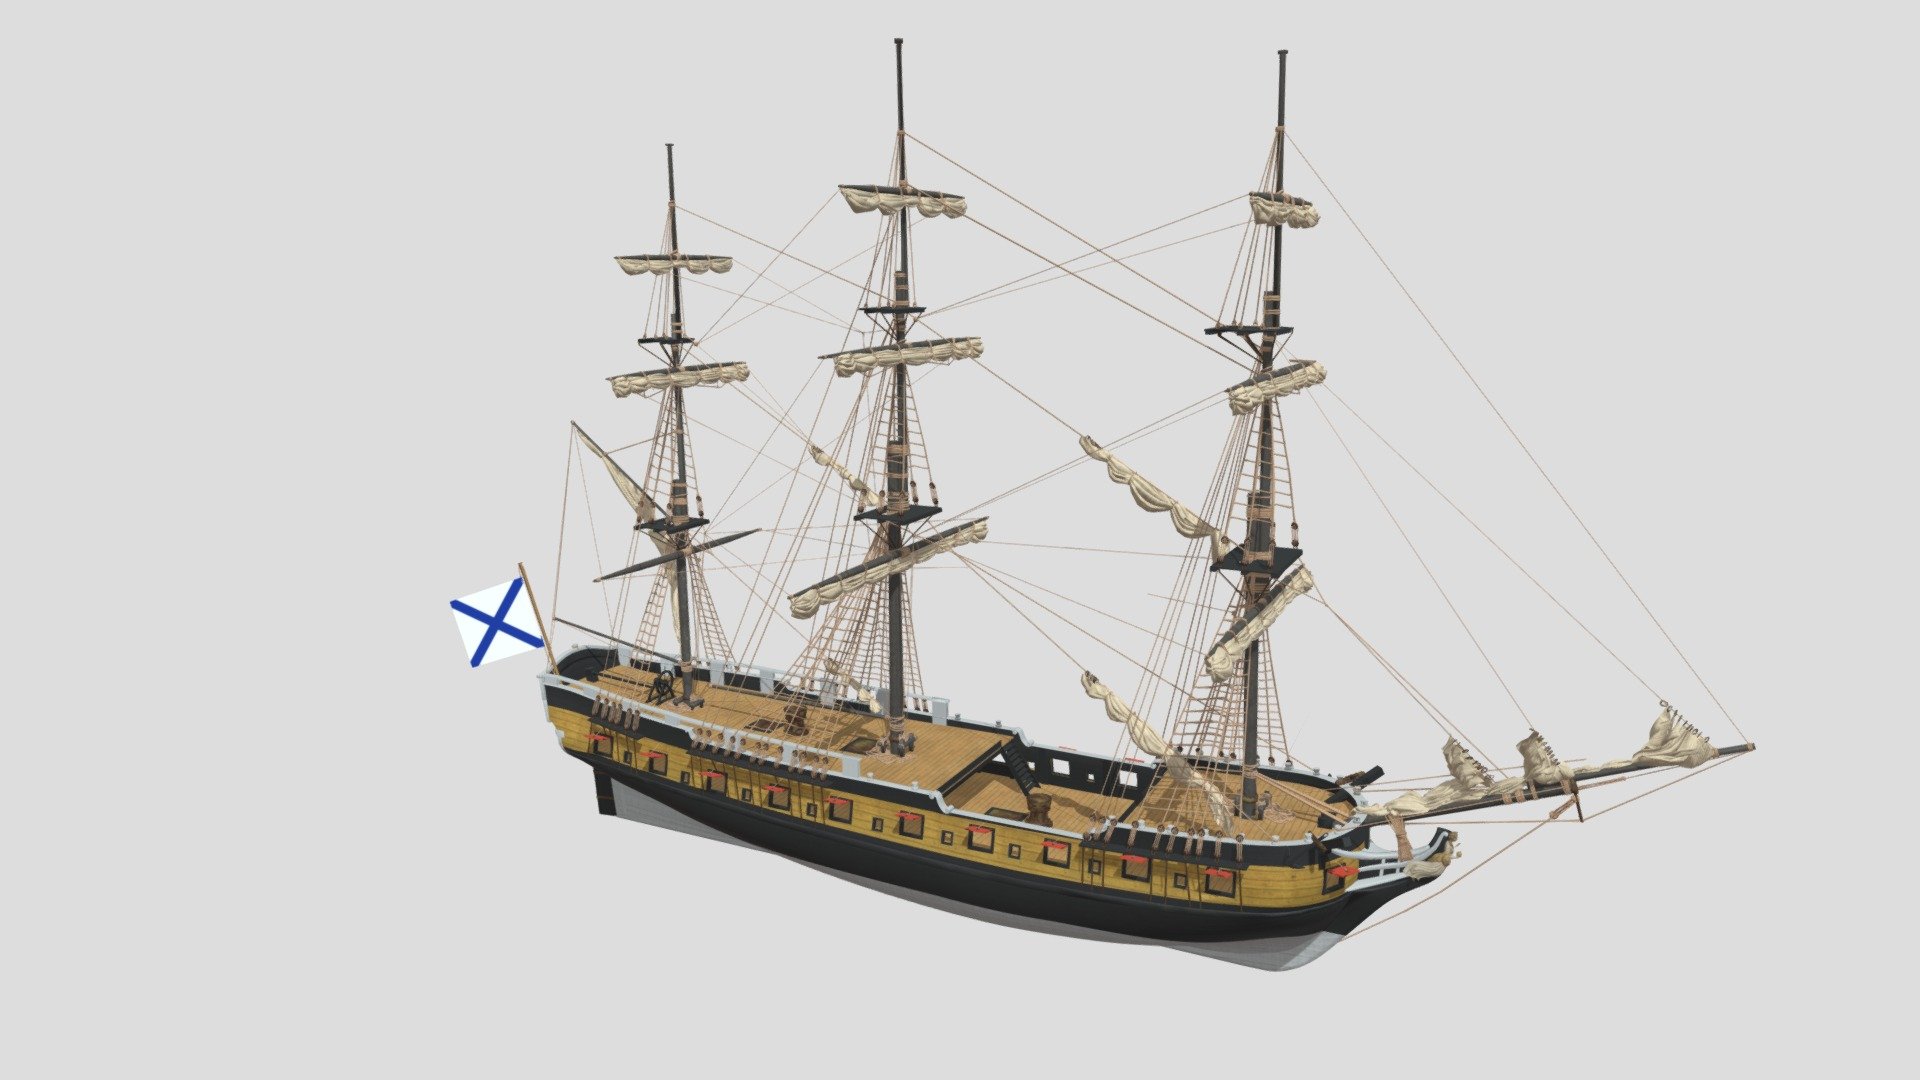 The Aleksander class frigate Svjatoi Nikolai was the largest Russian archipelago navy class ship in 1790. The ship sunk in the Second Battle of Svensksund (Ruotsinsalmi) on July 9th 1790 and was rediscovered in 1948. Aleksandr class frigates had a typical ship rig of the period. Aleksandr class is known as an archipelago or rowing frigate.

Hull dimensions:
•   Length at waterline: 39.60 m
•   Greatest width (breadth): 9.80 m
•   Greatest depth: 3.6 m

Ship 01A, Russian Aleksander Frigate Class, Open sails, 9.5.2020, programs: Blender, Substance Painter, UE4

This model was created in the Maritime Museum of Finland project &ldquo;Historia eläväksi digitaalisella tarinankerronnalla